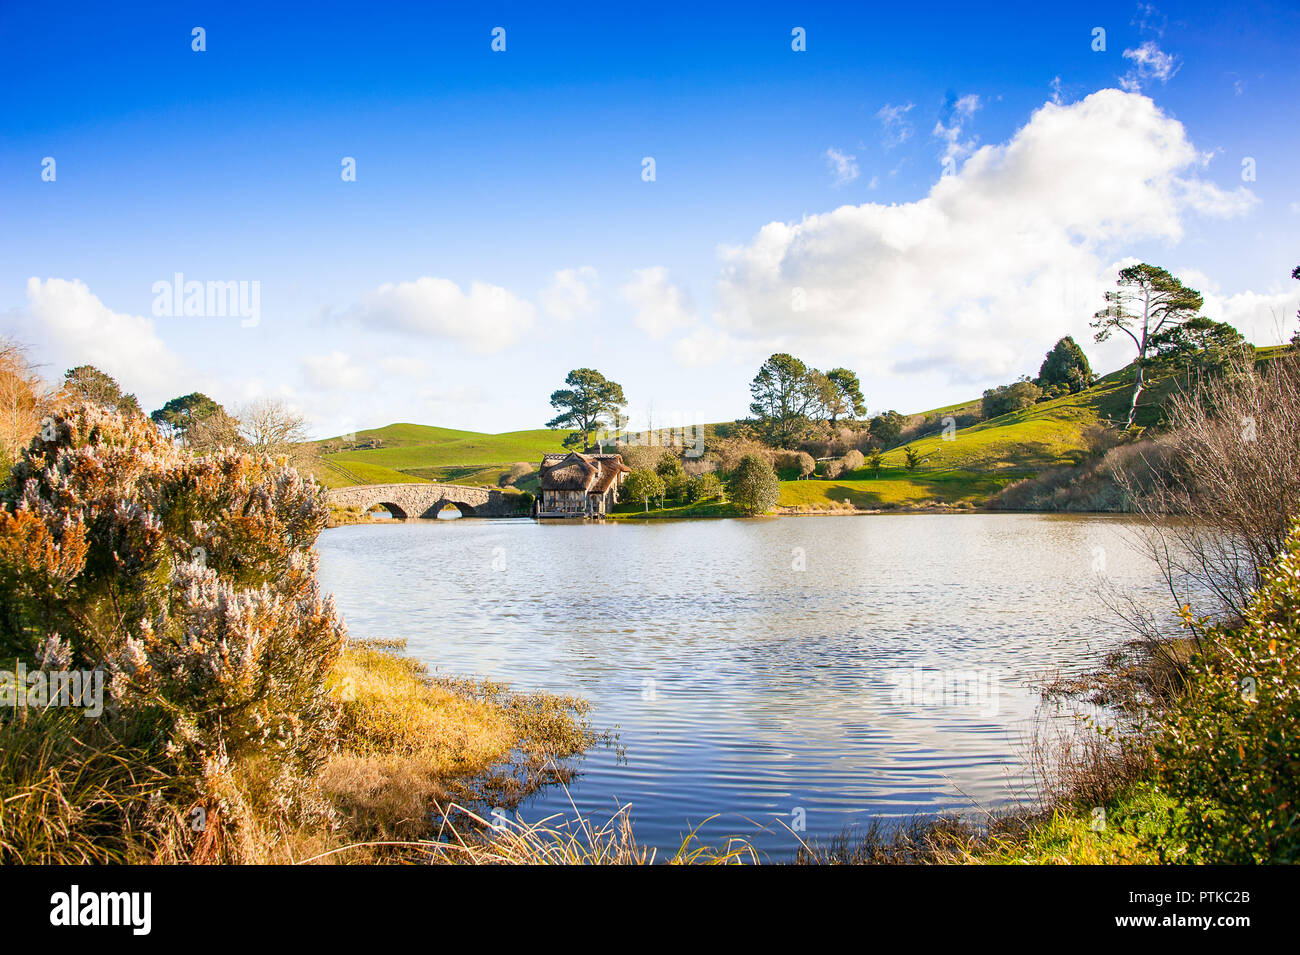 Matamata, New Zealand: Hobbiton movie set created to film Lord of the Rings and The Hobbit. View across lake to old mill and bridge. Stock Photo